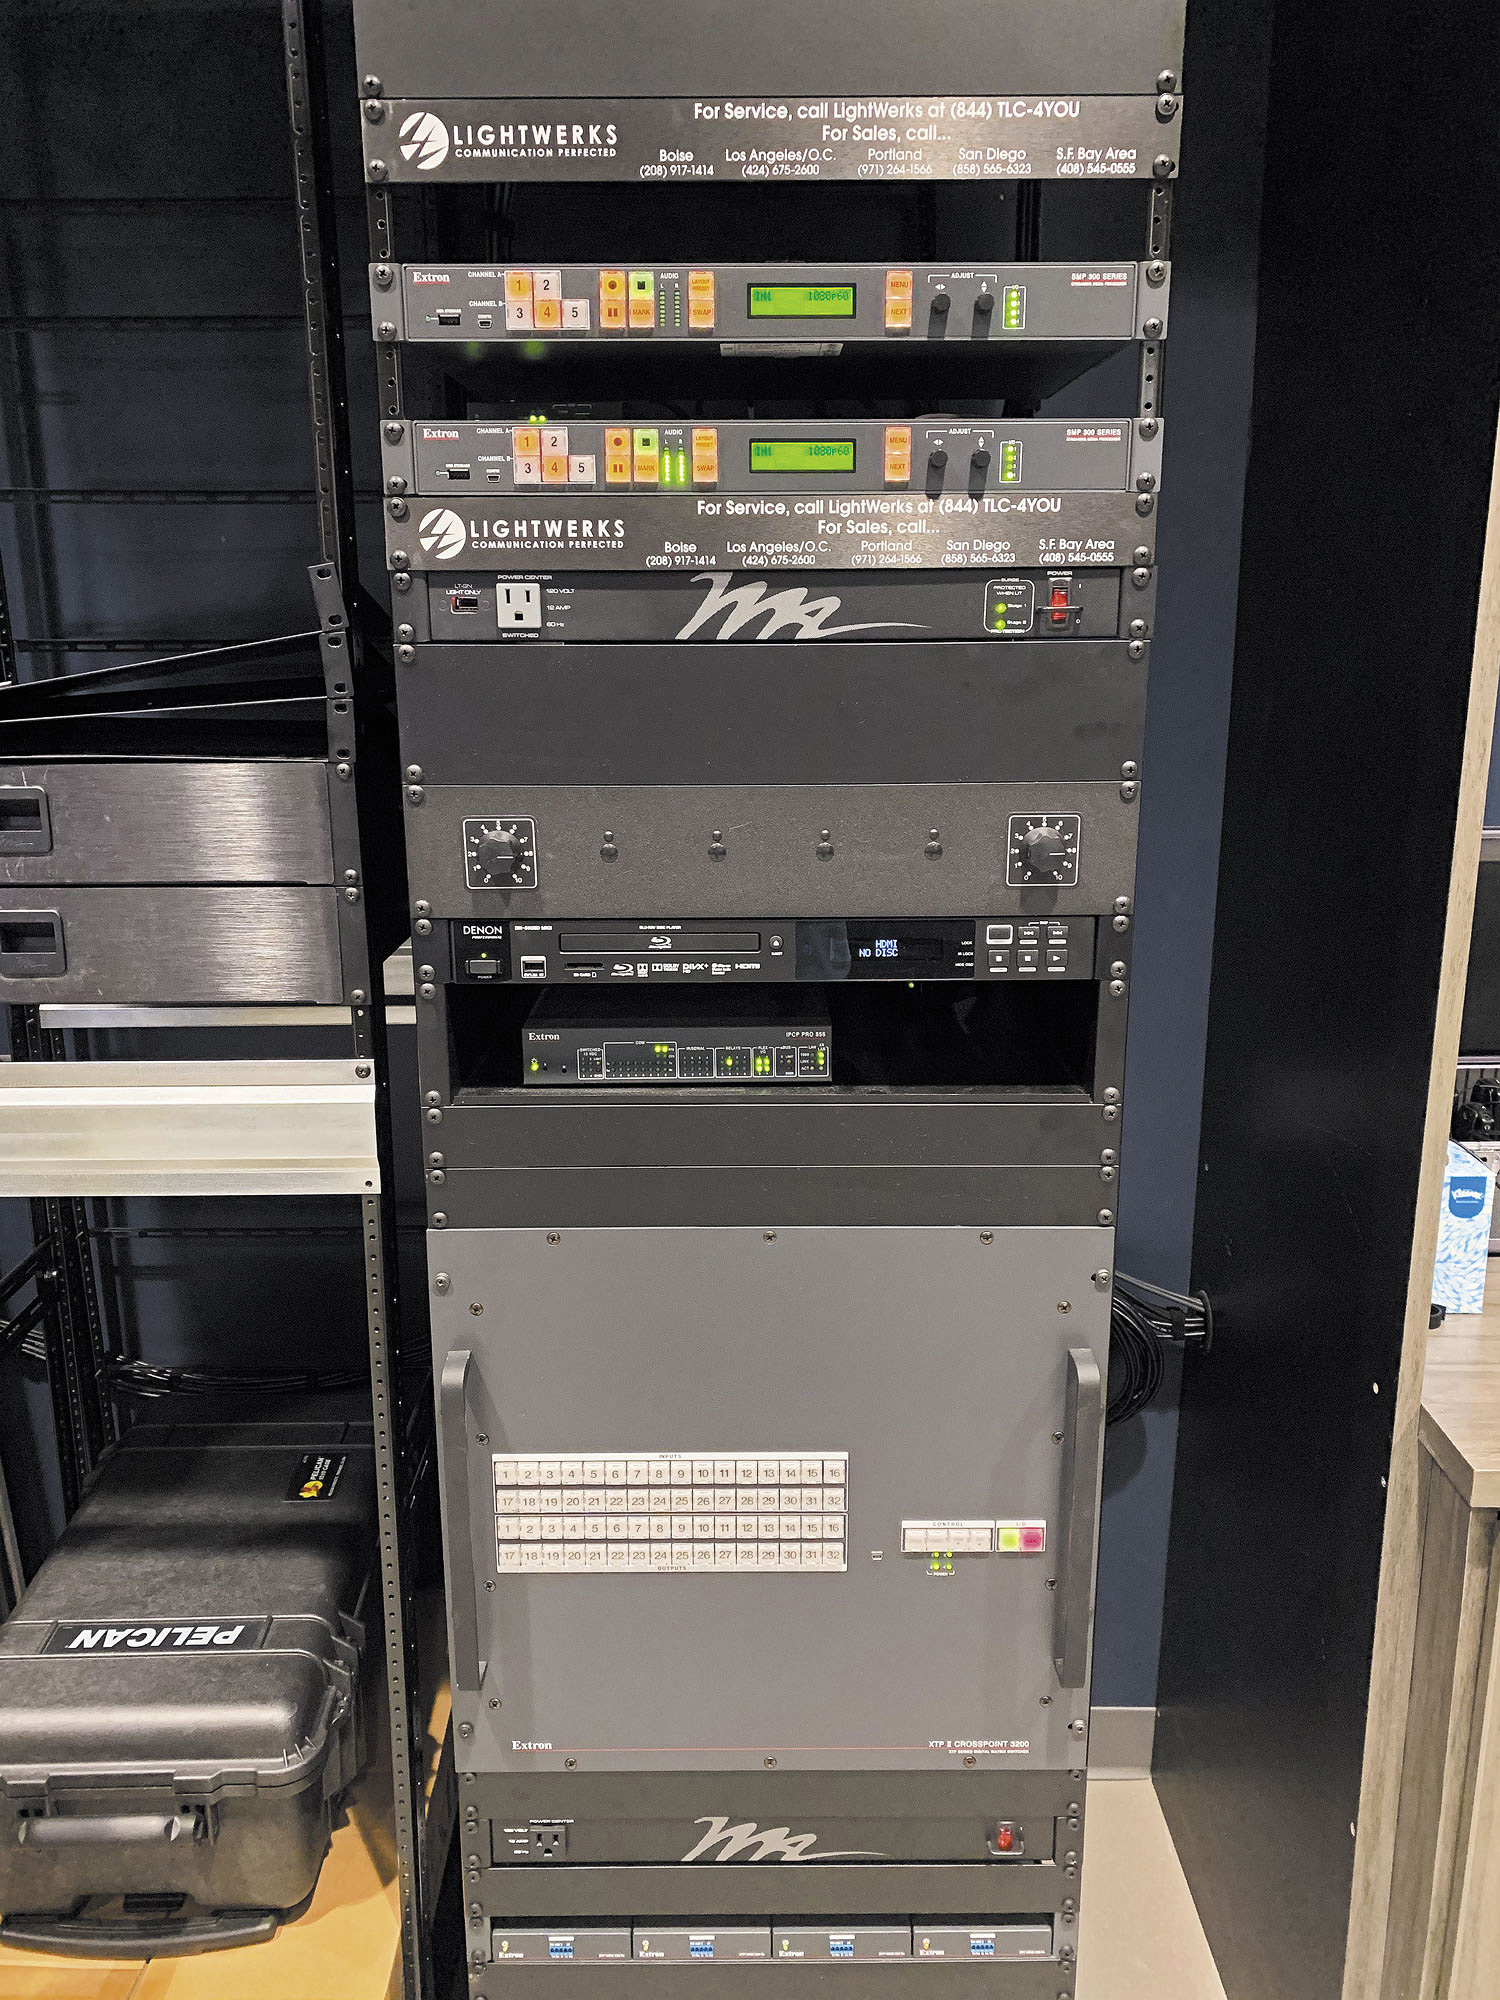 The XTP II CrossPoint 3200 matrix switcher and other AV components that supports the auditorium are rack-mounted in the control room.